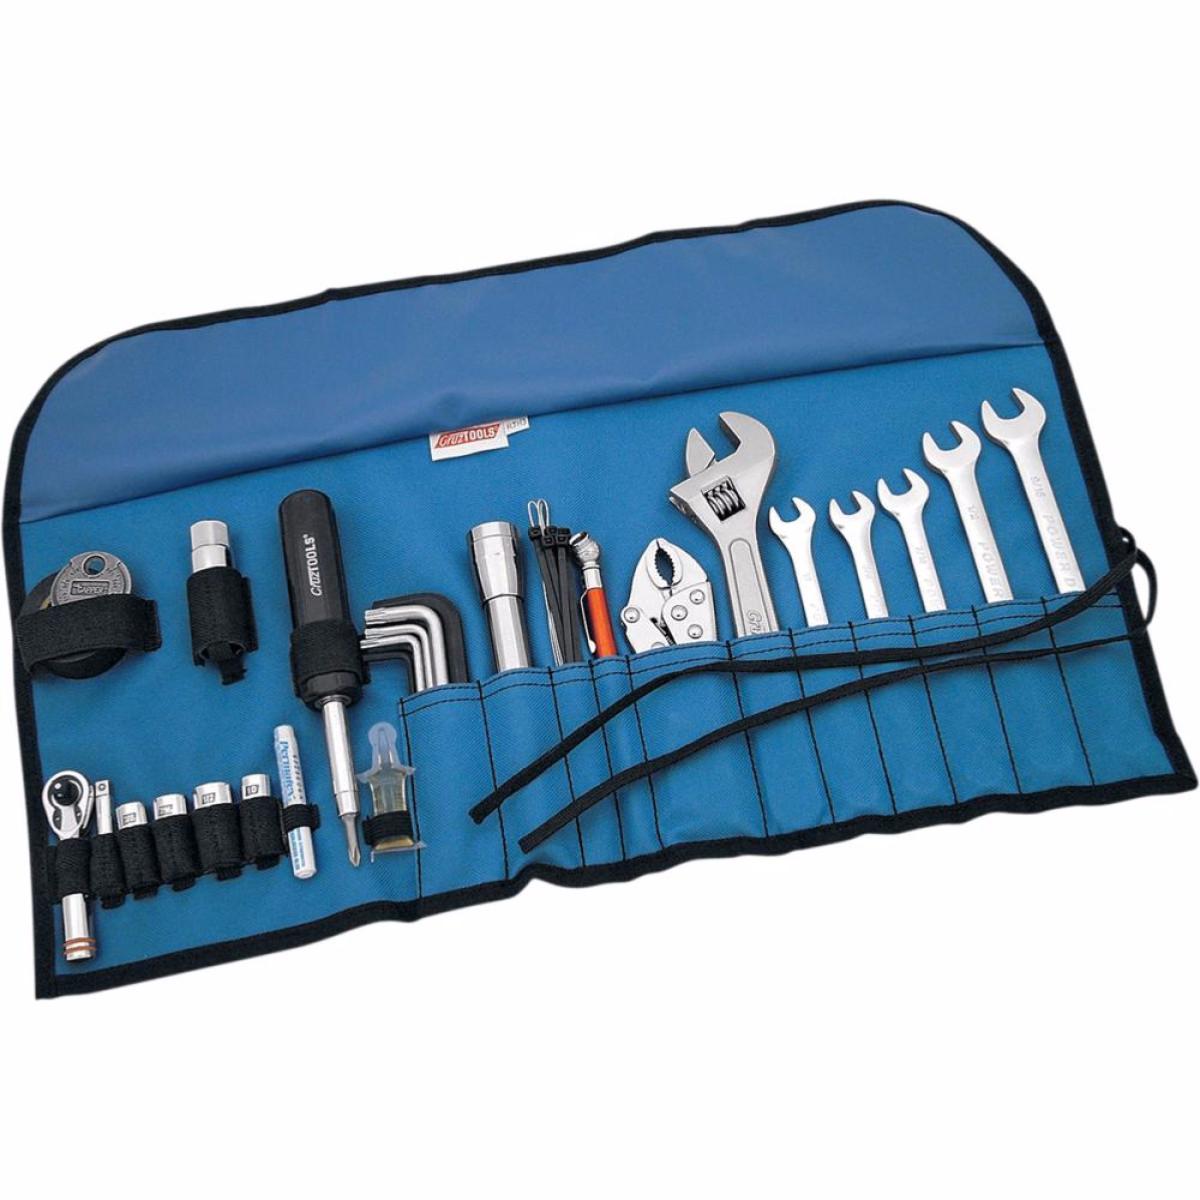 TROUSSE à OUTILS HARLEY H3 ROADTECHPE38120019 CRUZTOOLS TOOL